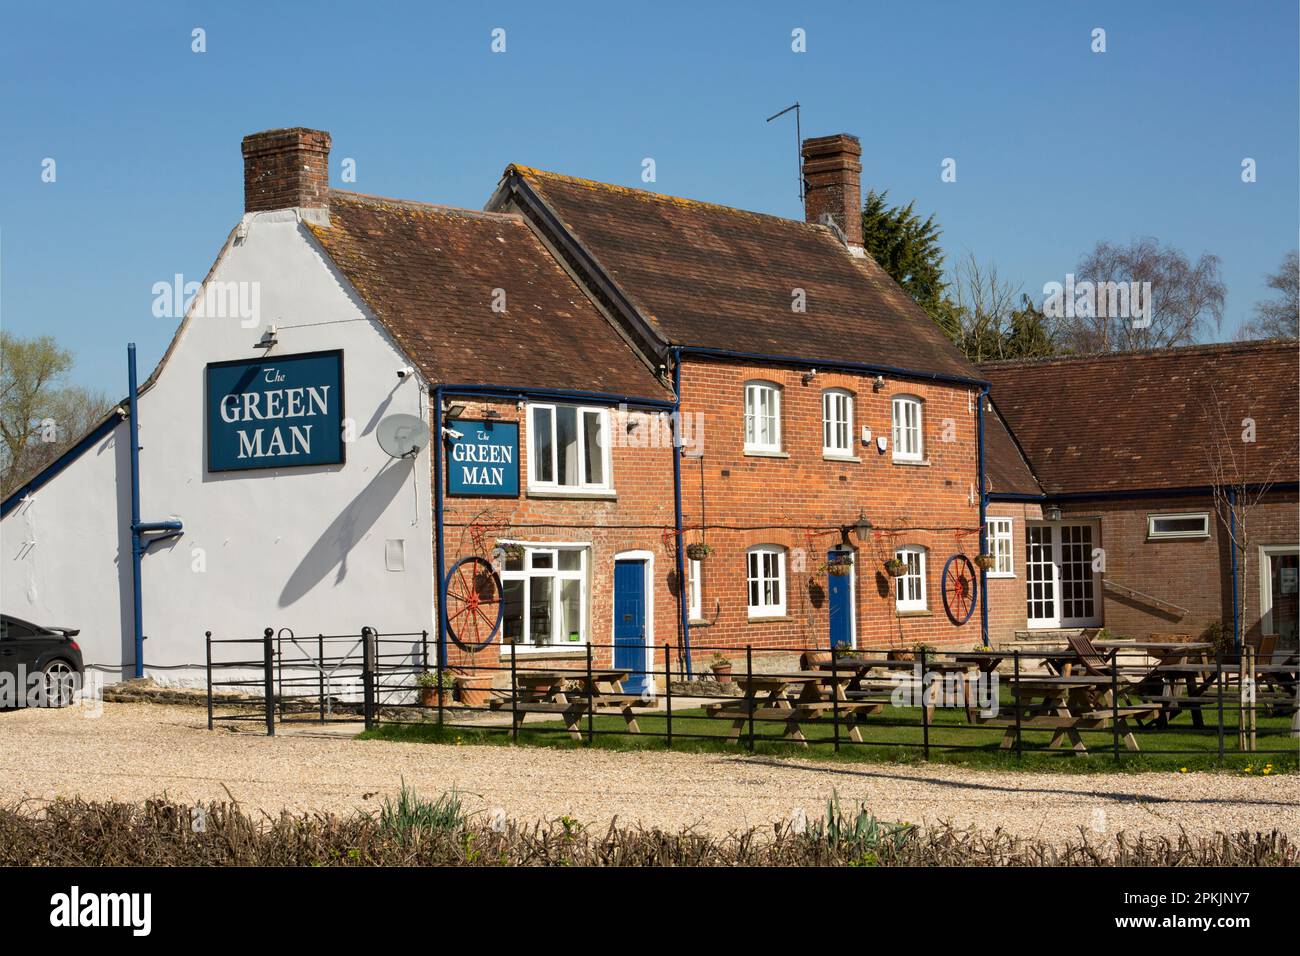 The Green Man pub at King’s Stag Dorset England UK GB Stock Photo